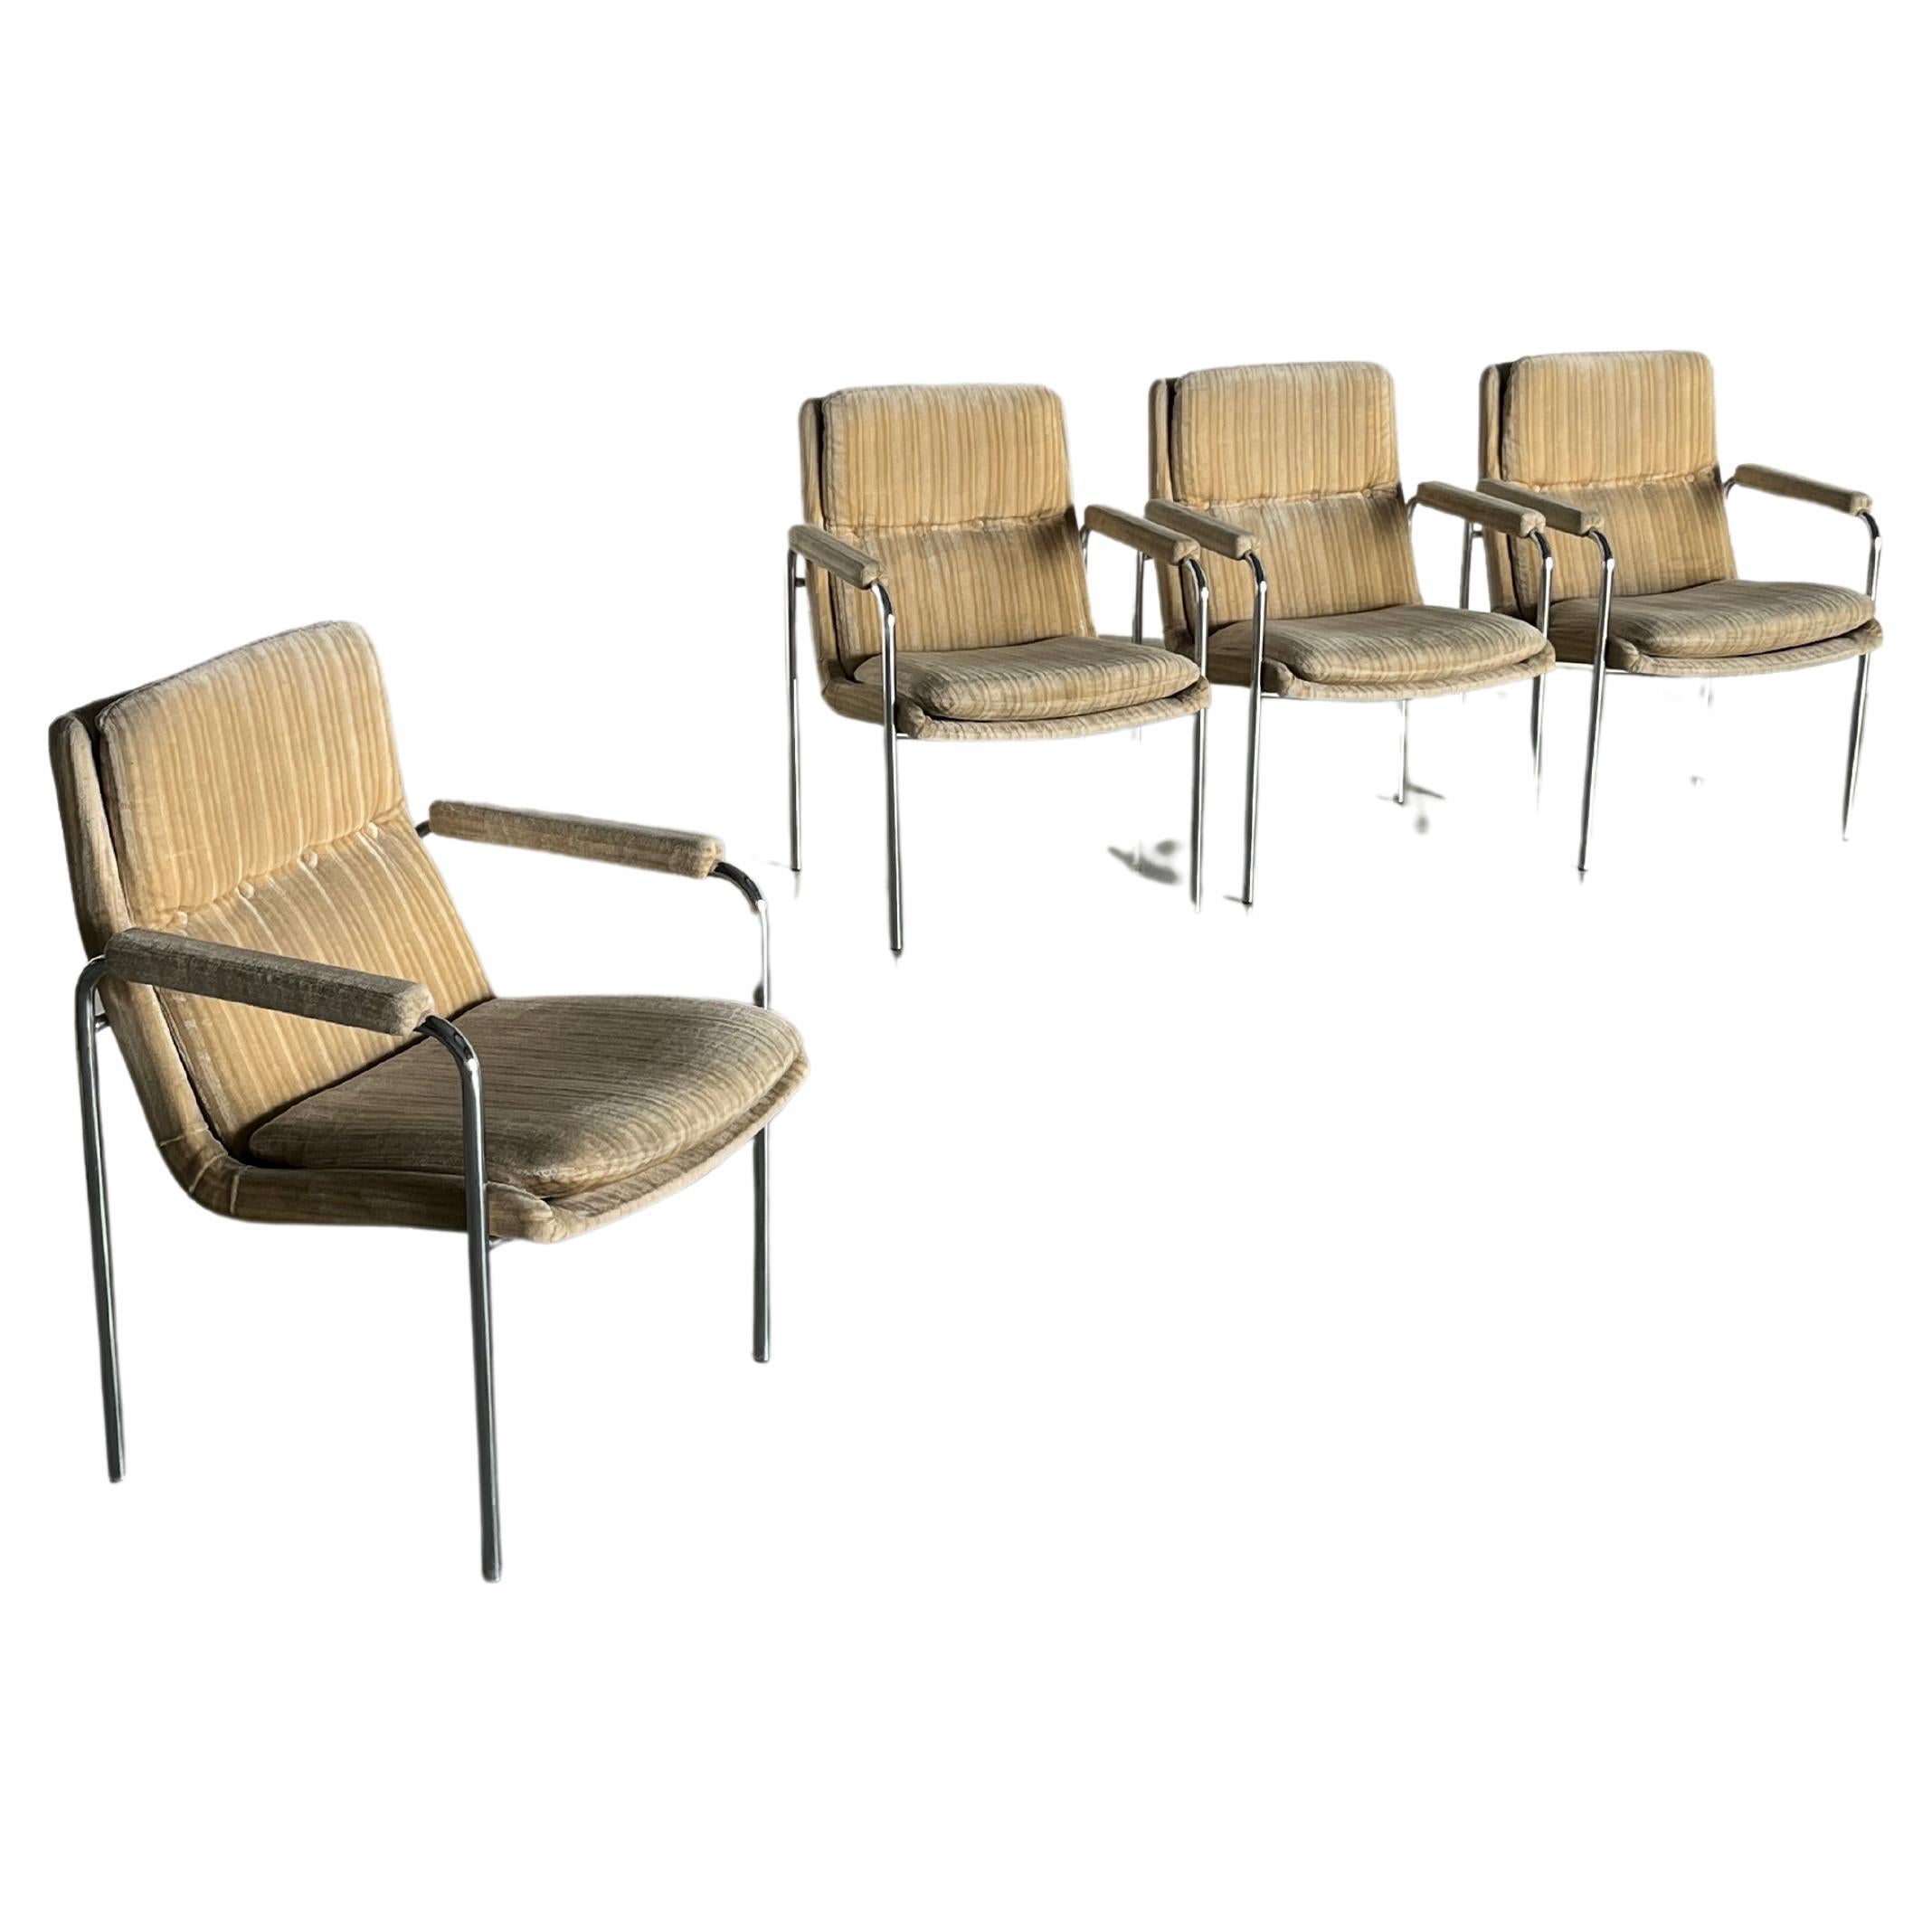 1 of 4 Mid-Century Chrome Tubular Steel and Striped Upholstery Armchairs, 1970s For Sale